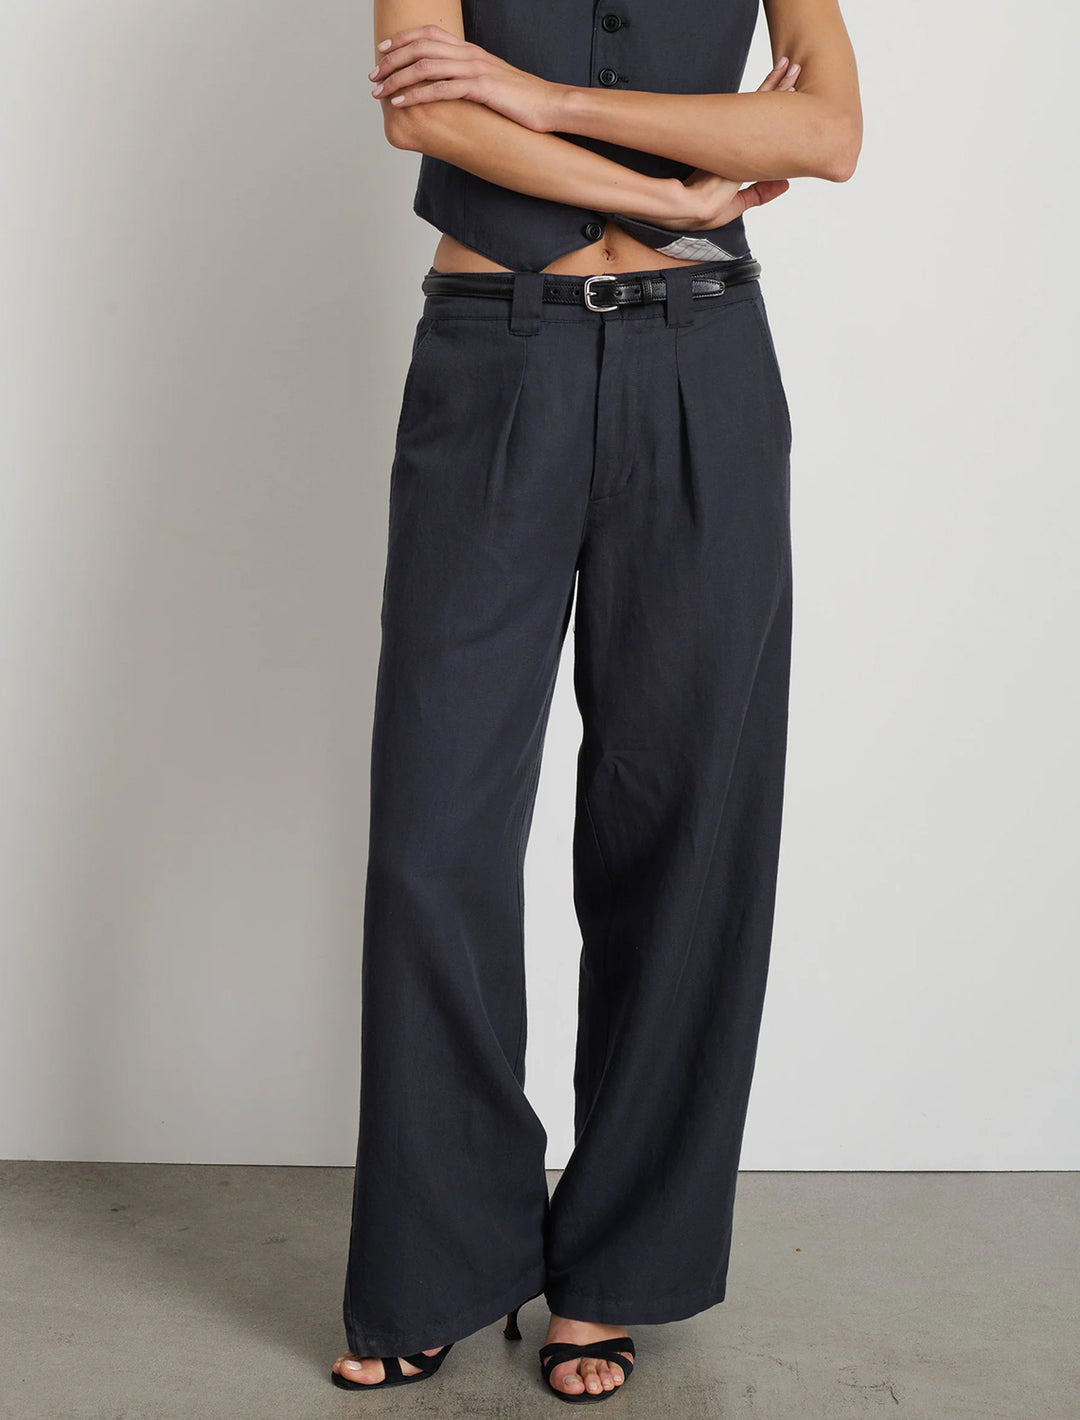 Model wearing Alex Mill's madeline twill pleated trouser in washed black.